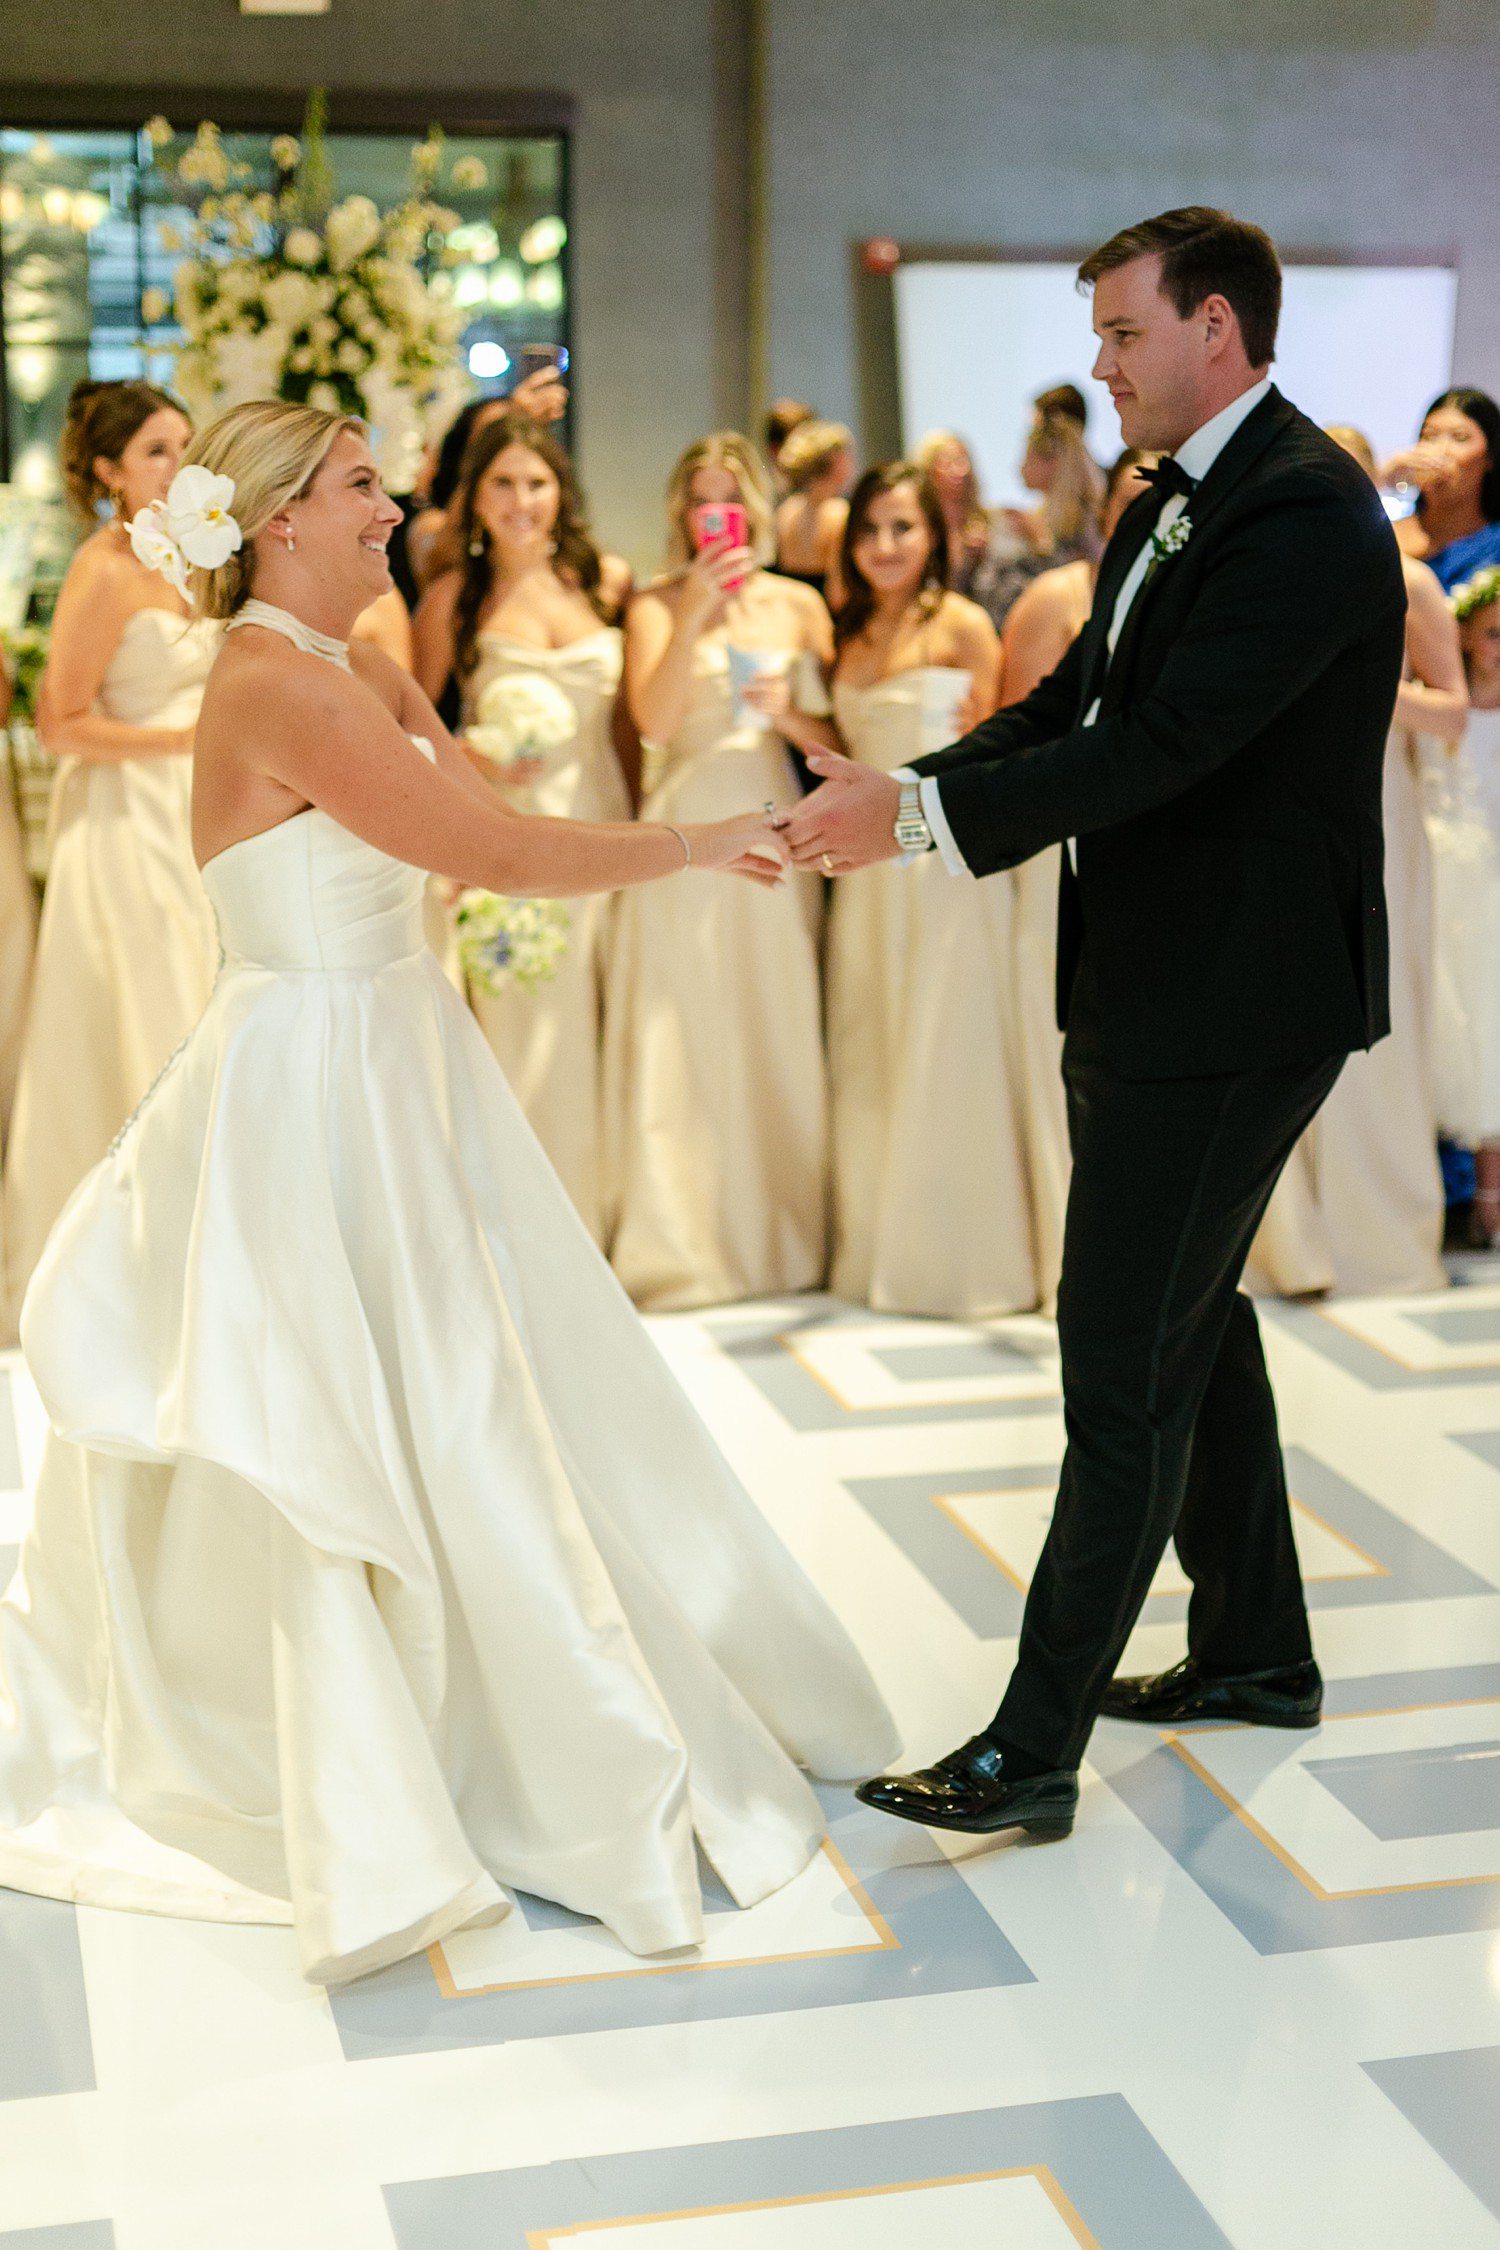 Bride and groom first dance at Austin Country Club wedding.